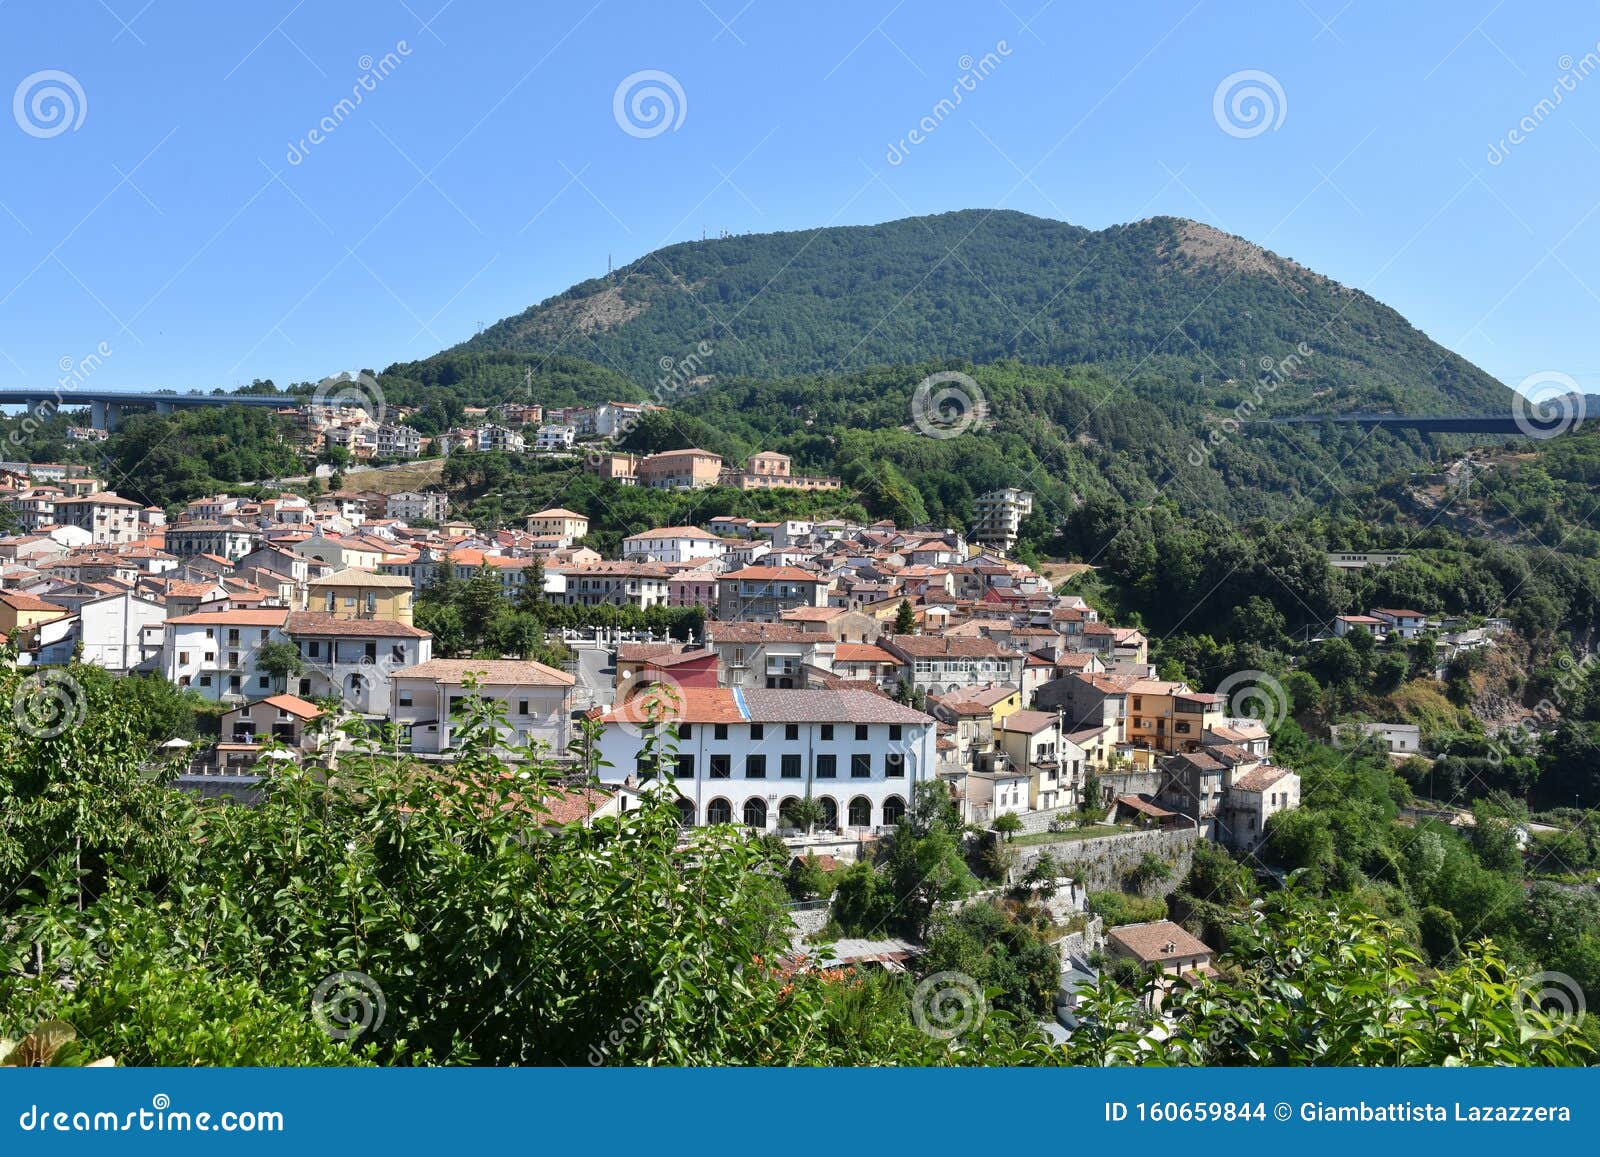 The Medieval Village of Lagonegro in the Basilicata Region, Italy ...